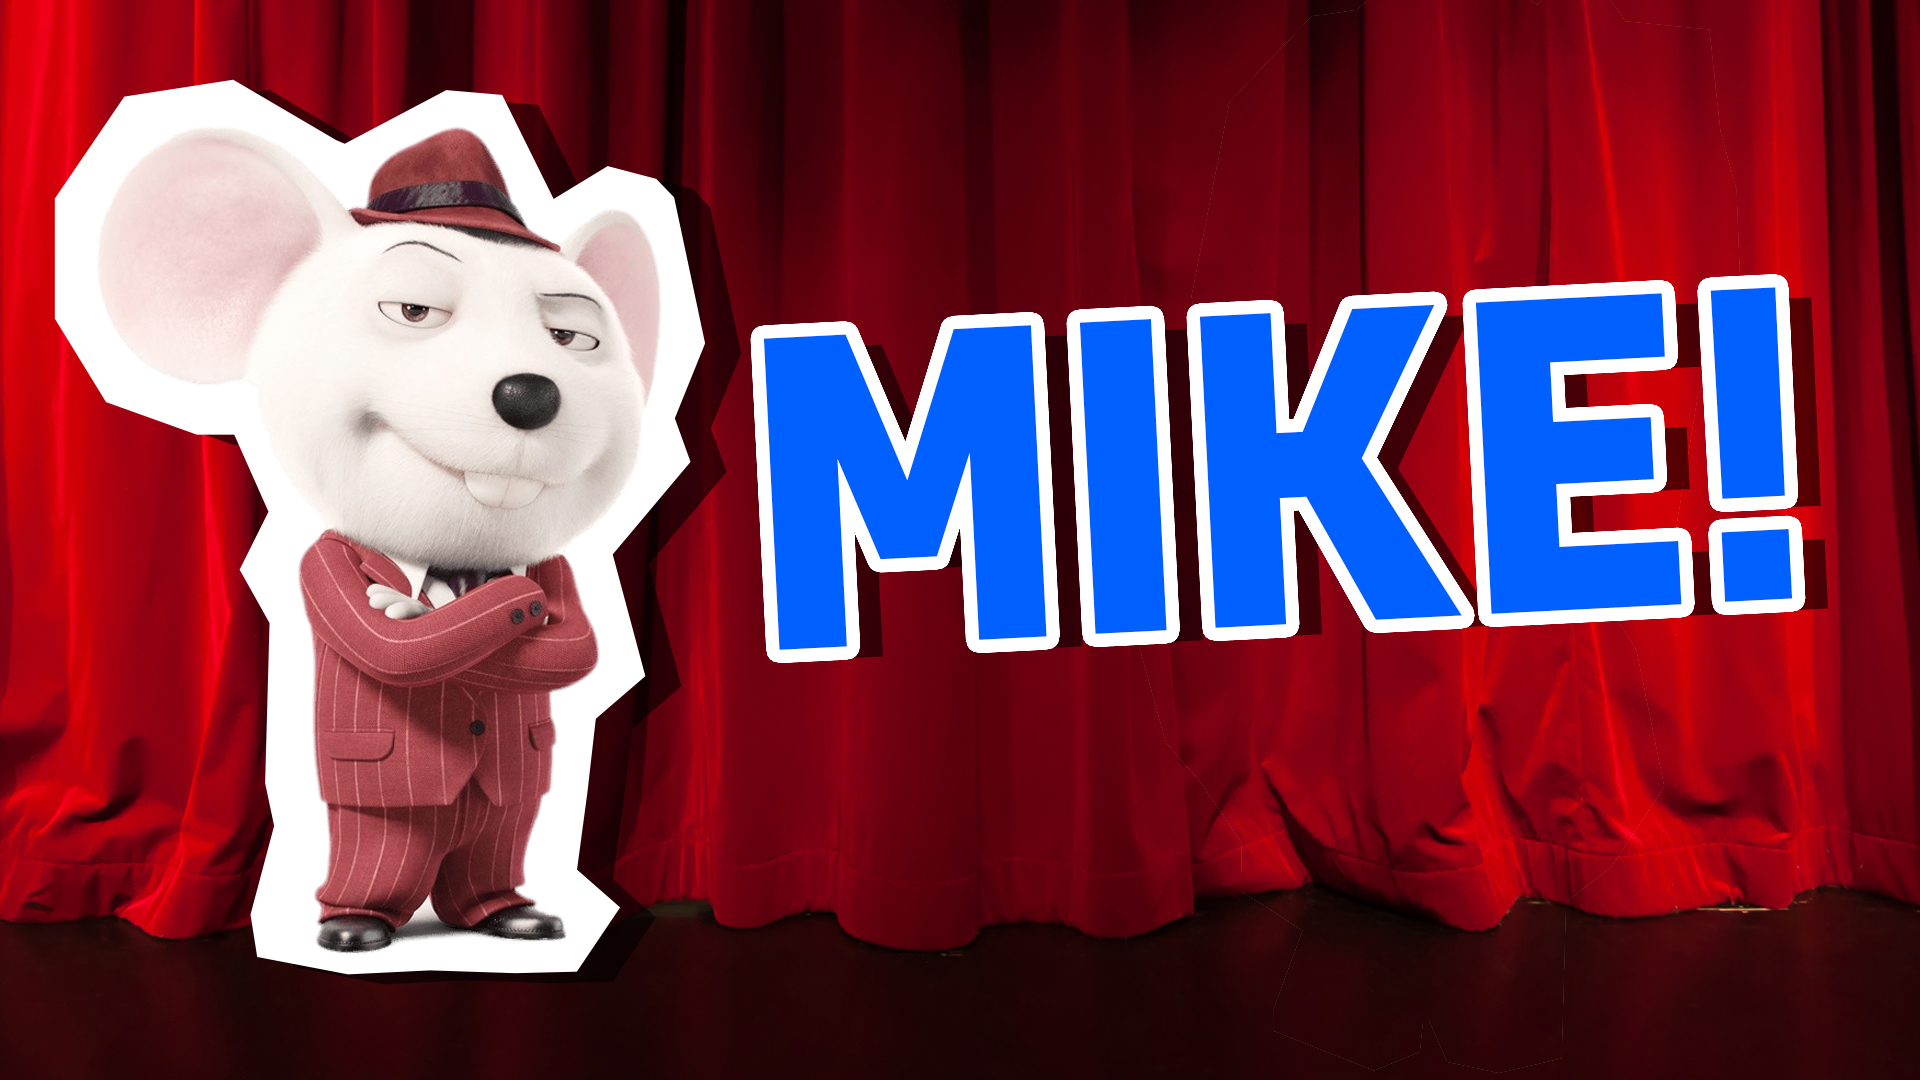 Mike from Sing! What Sing Character Are You? | Sing Quiz